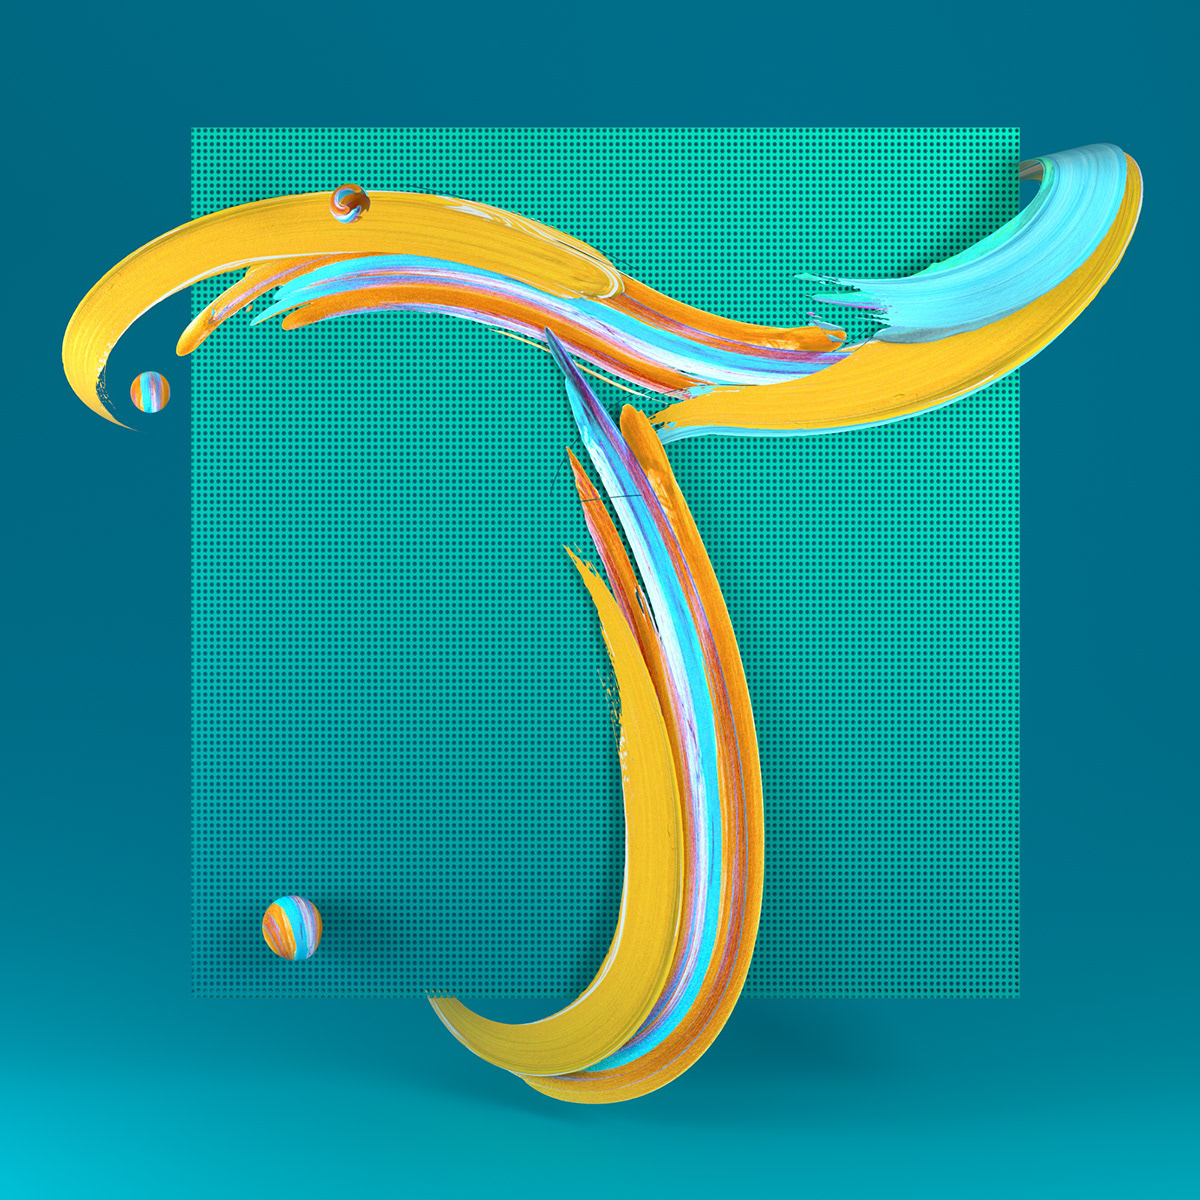 36 days of type alphabets arts cinema 4d letters motiongraphics octane typefaces types typography  